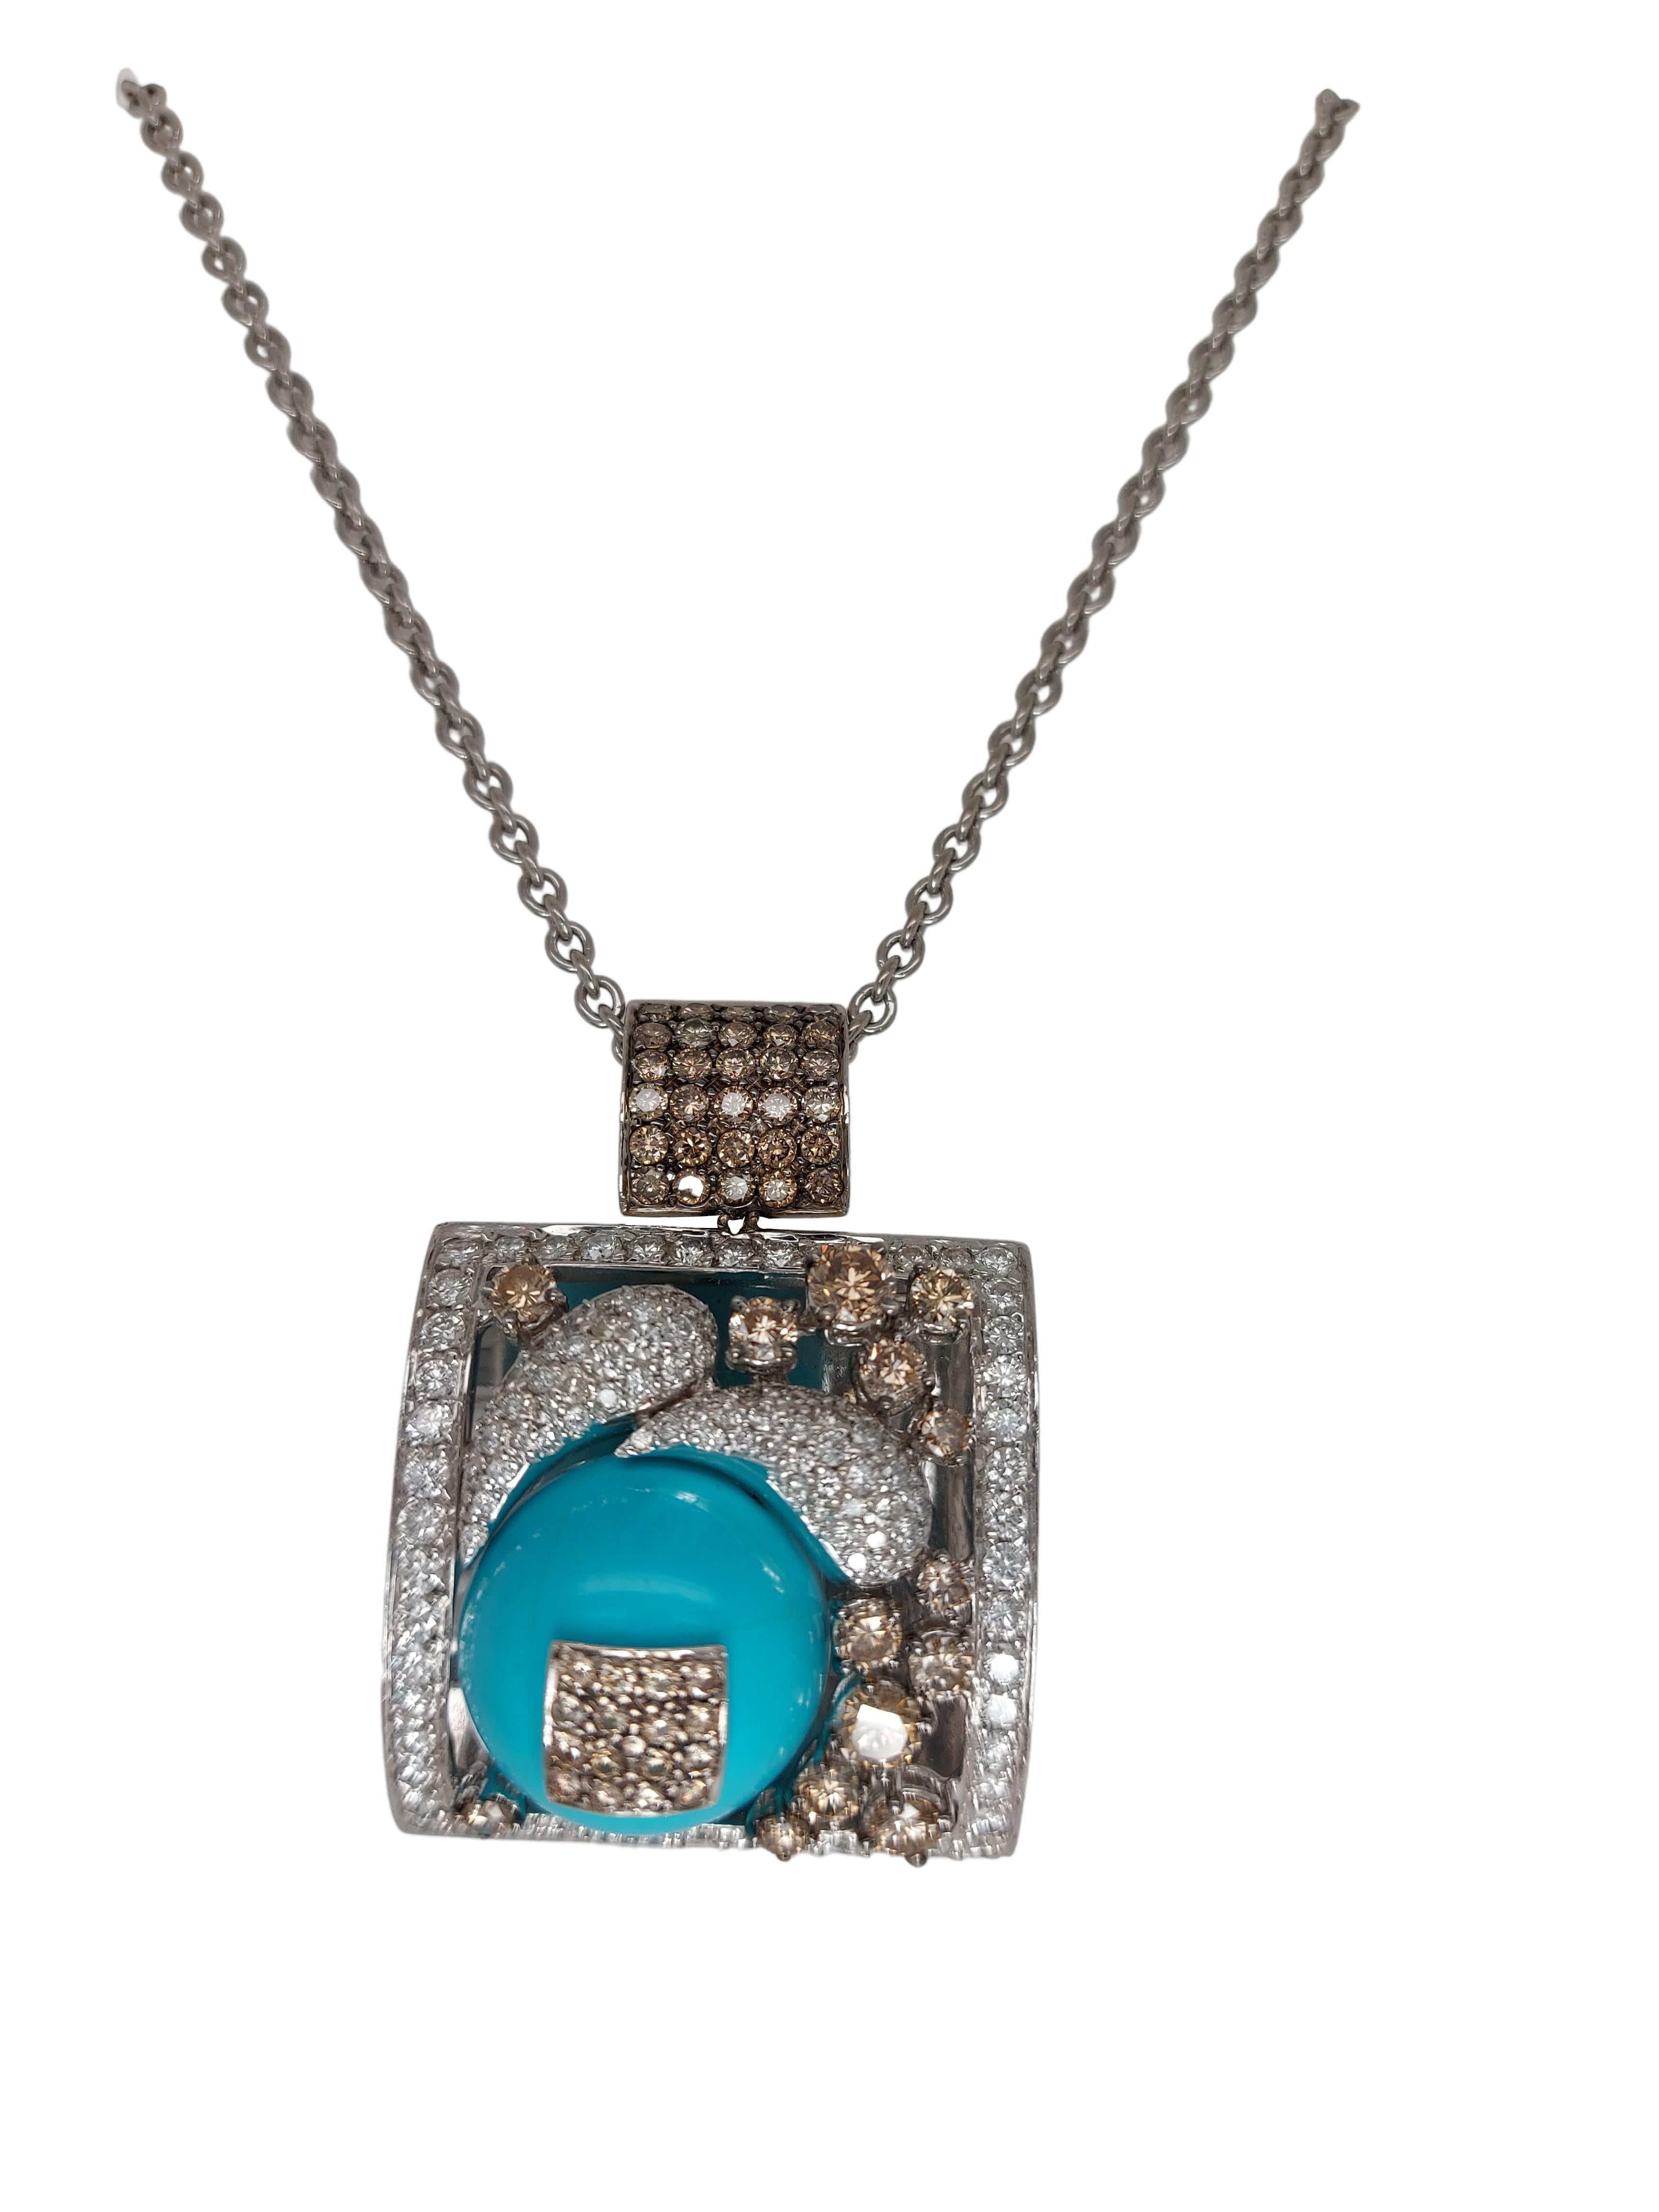 Stunning 18kt White Gold Pendant / Necklace with Turquoise and Diamonds 11